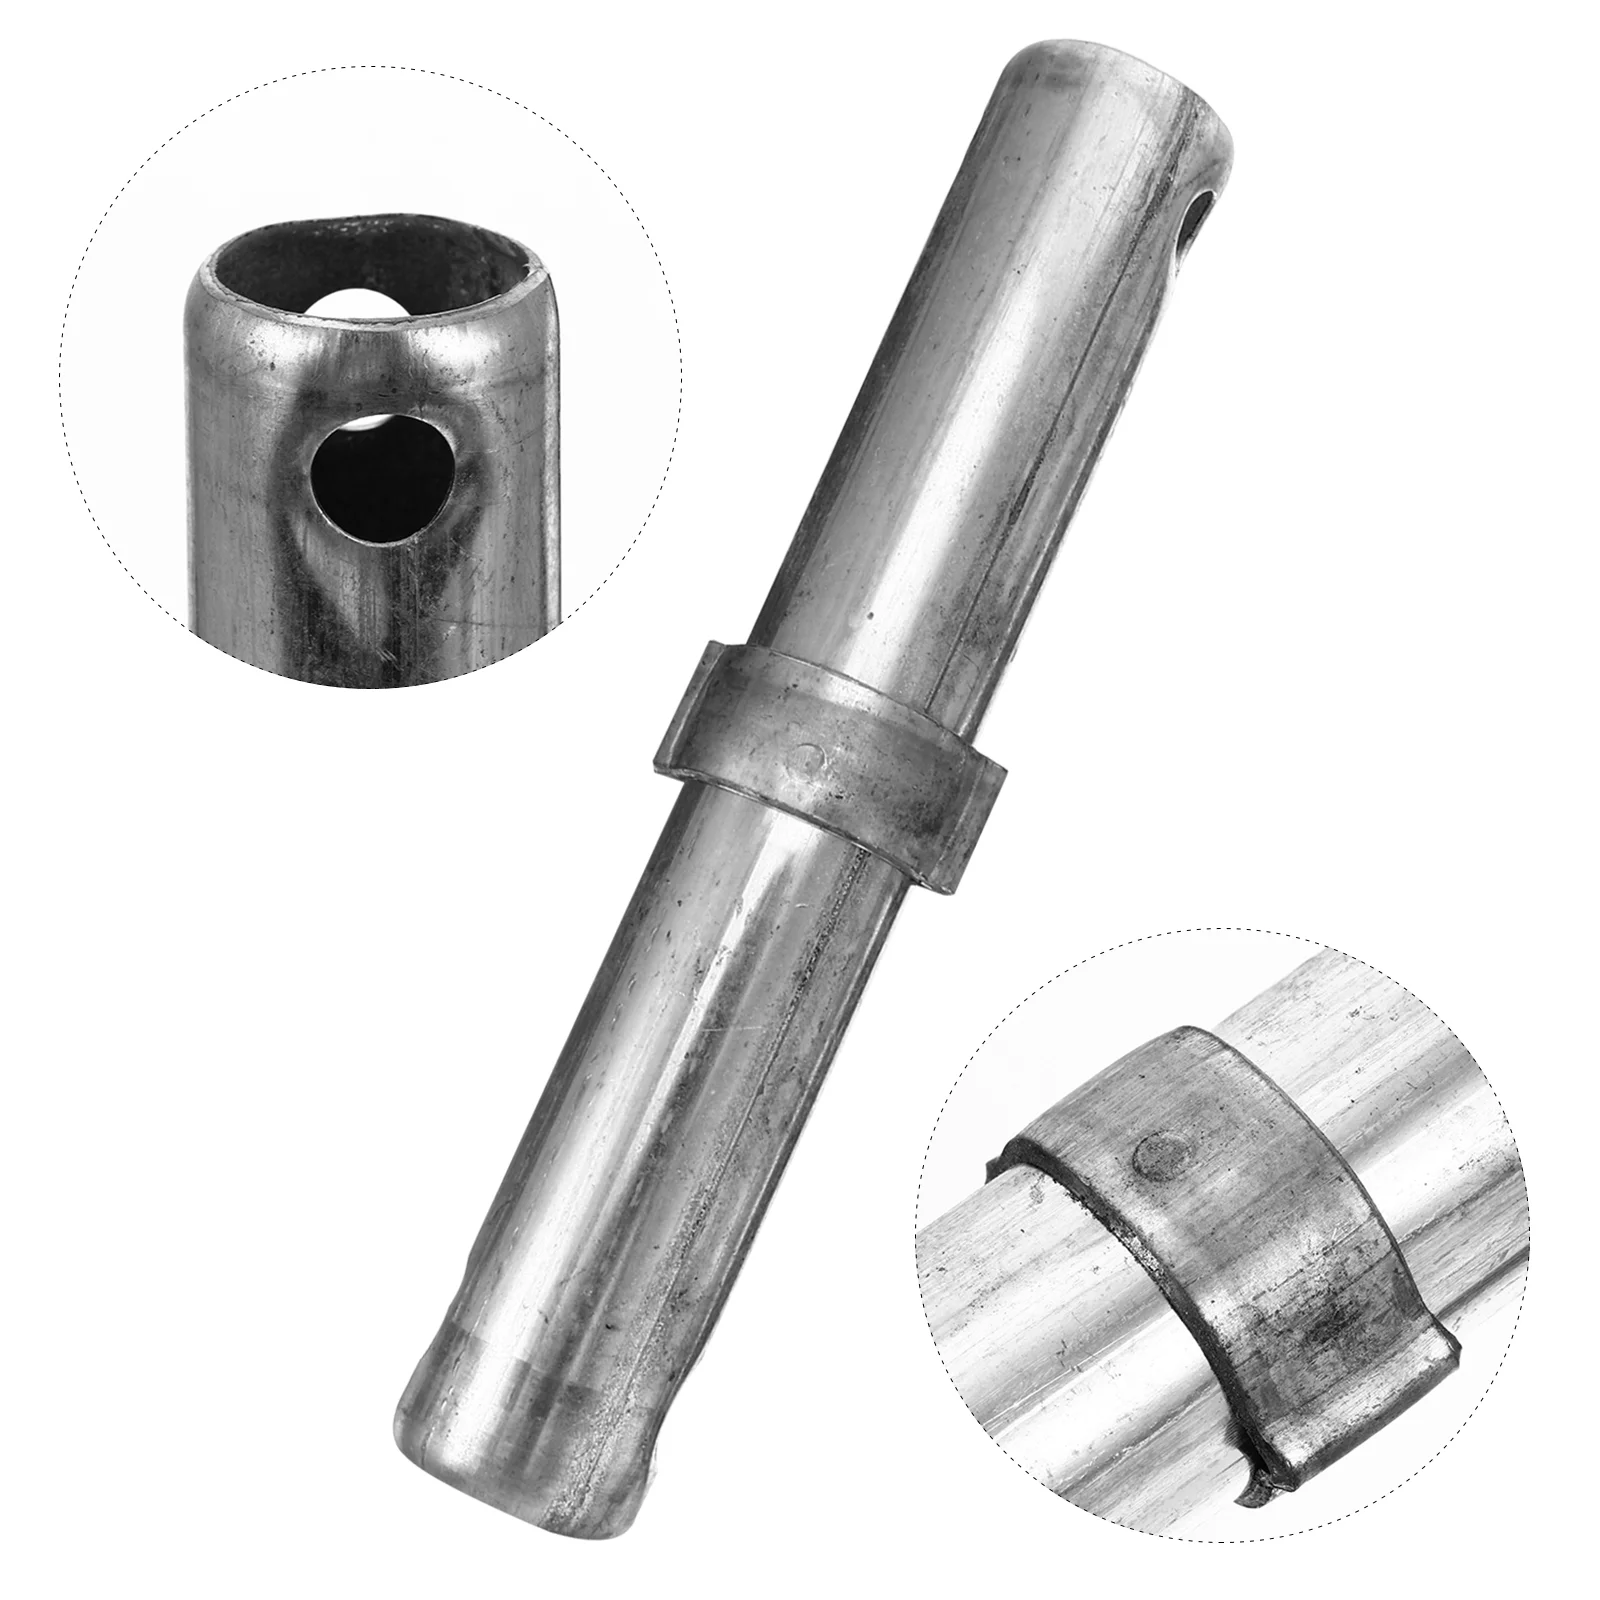 

Scaffolding Scaffold Pin Coupling Locking Accessories Pigtail Supplies Replacement Equipment Spring Retainers Connector Collar